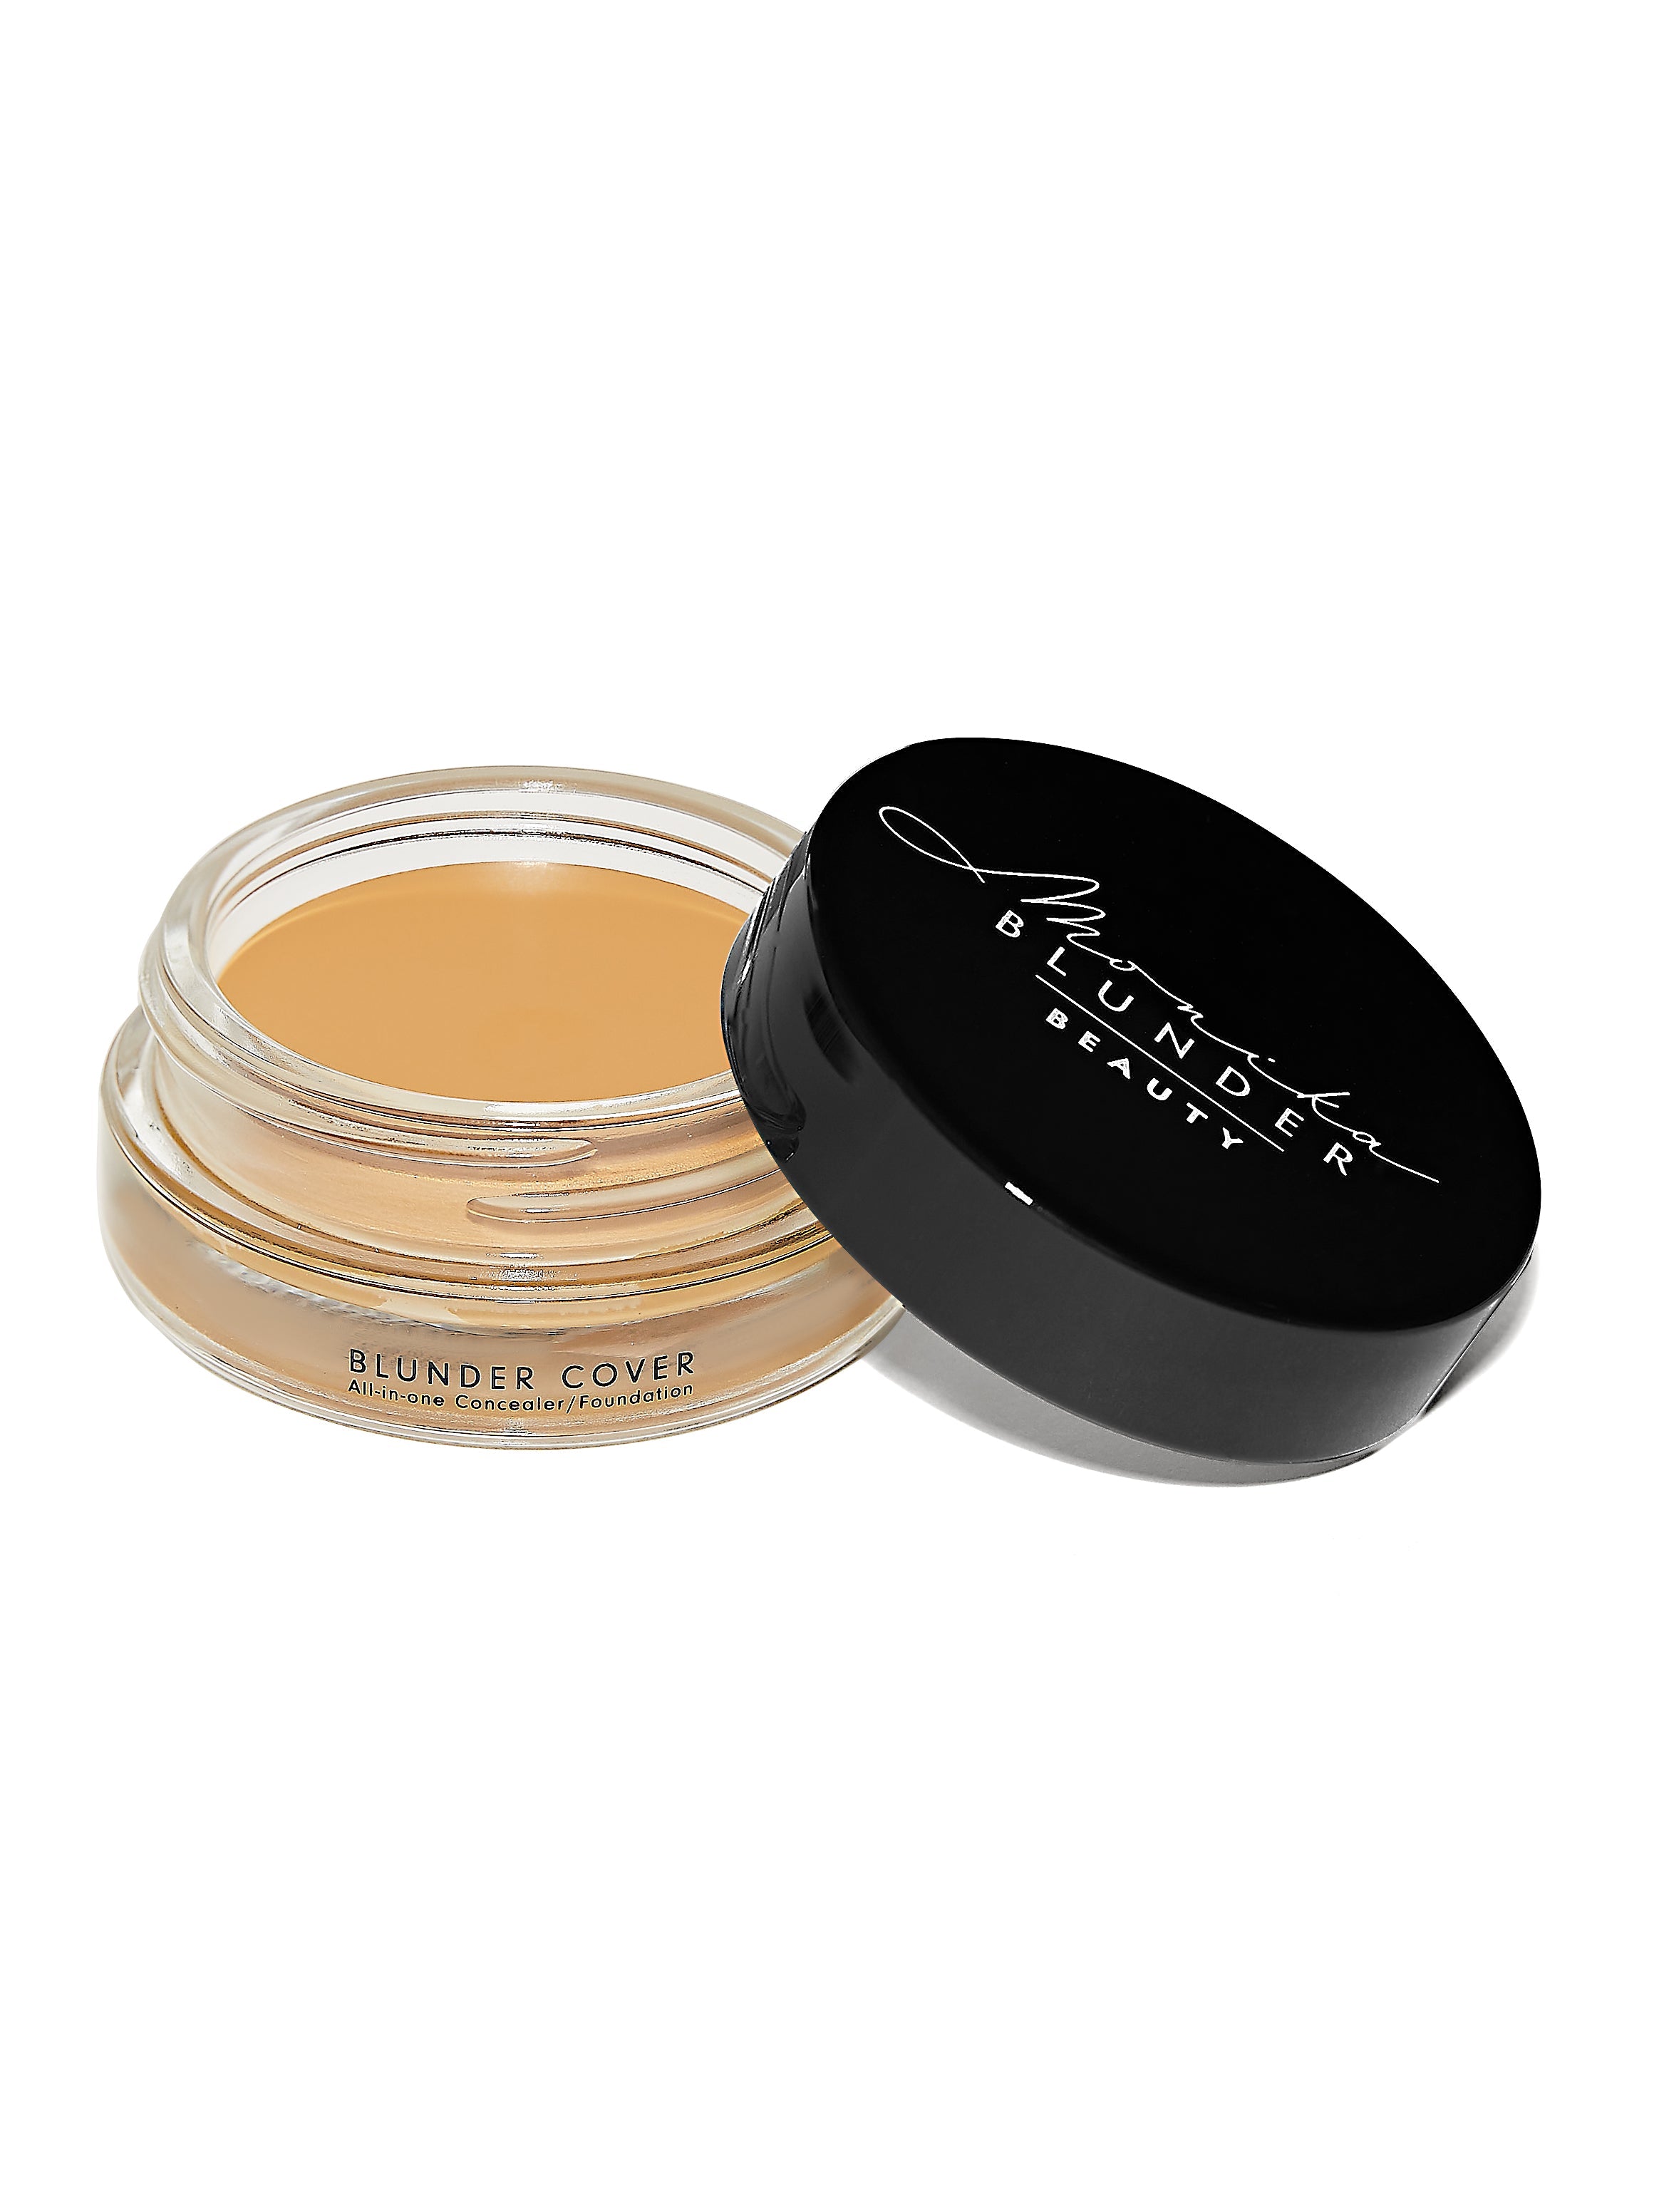 Blunder Cover an All-In-One Foundation/Concealer Shade - Vier.5 - 0